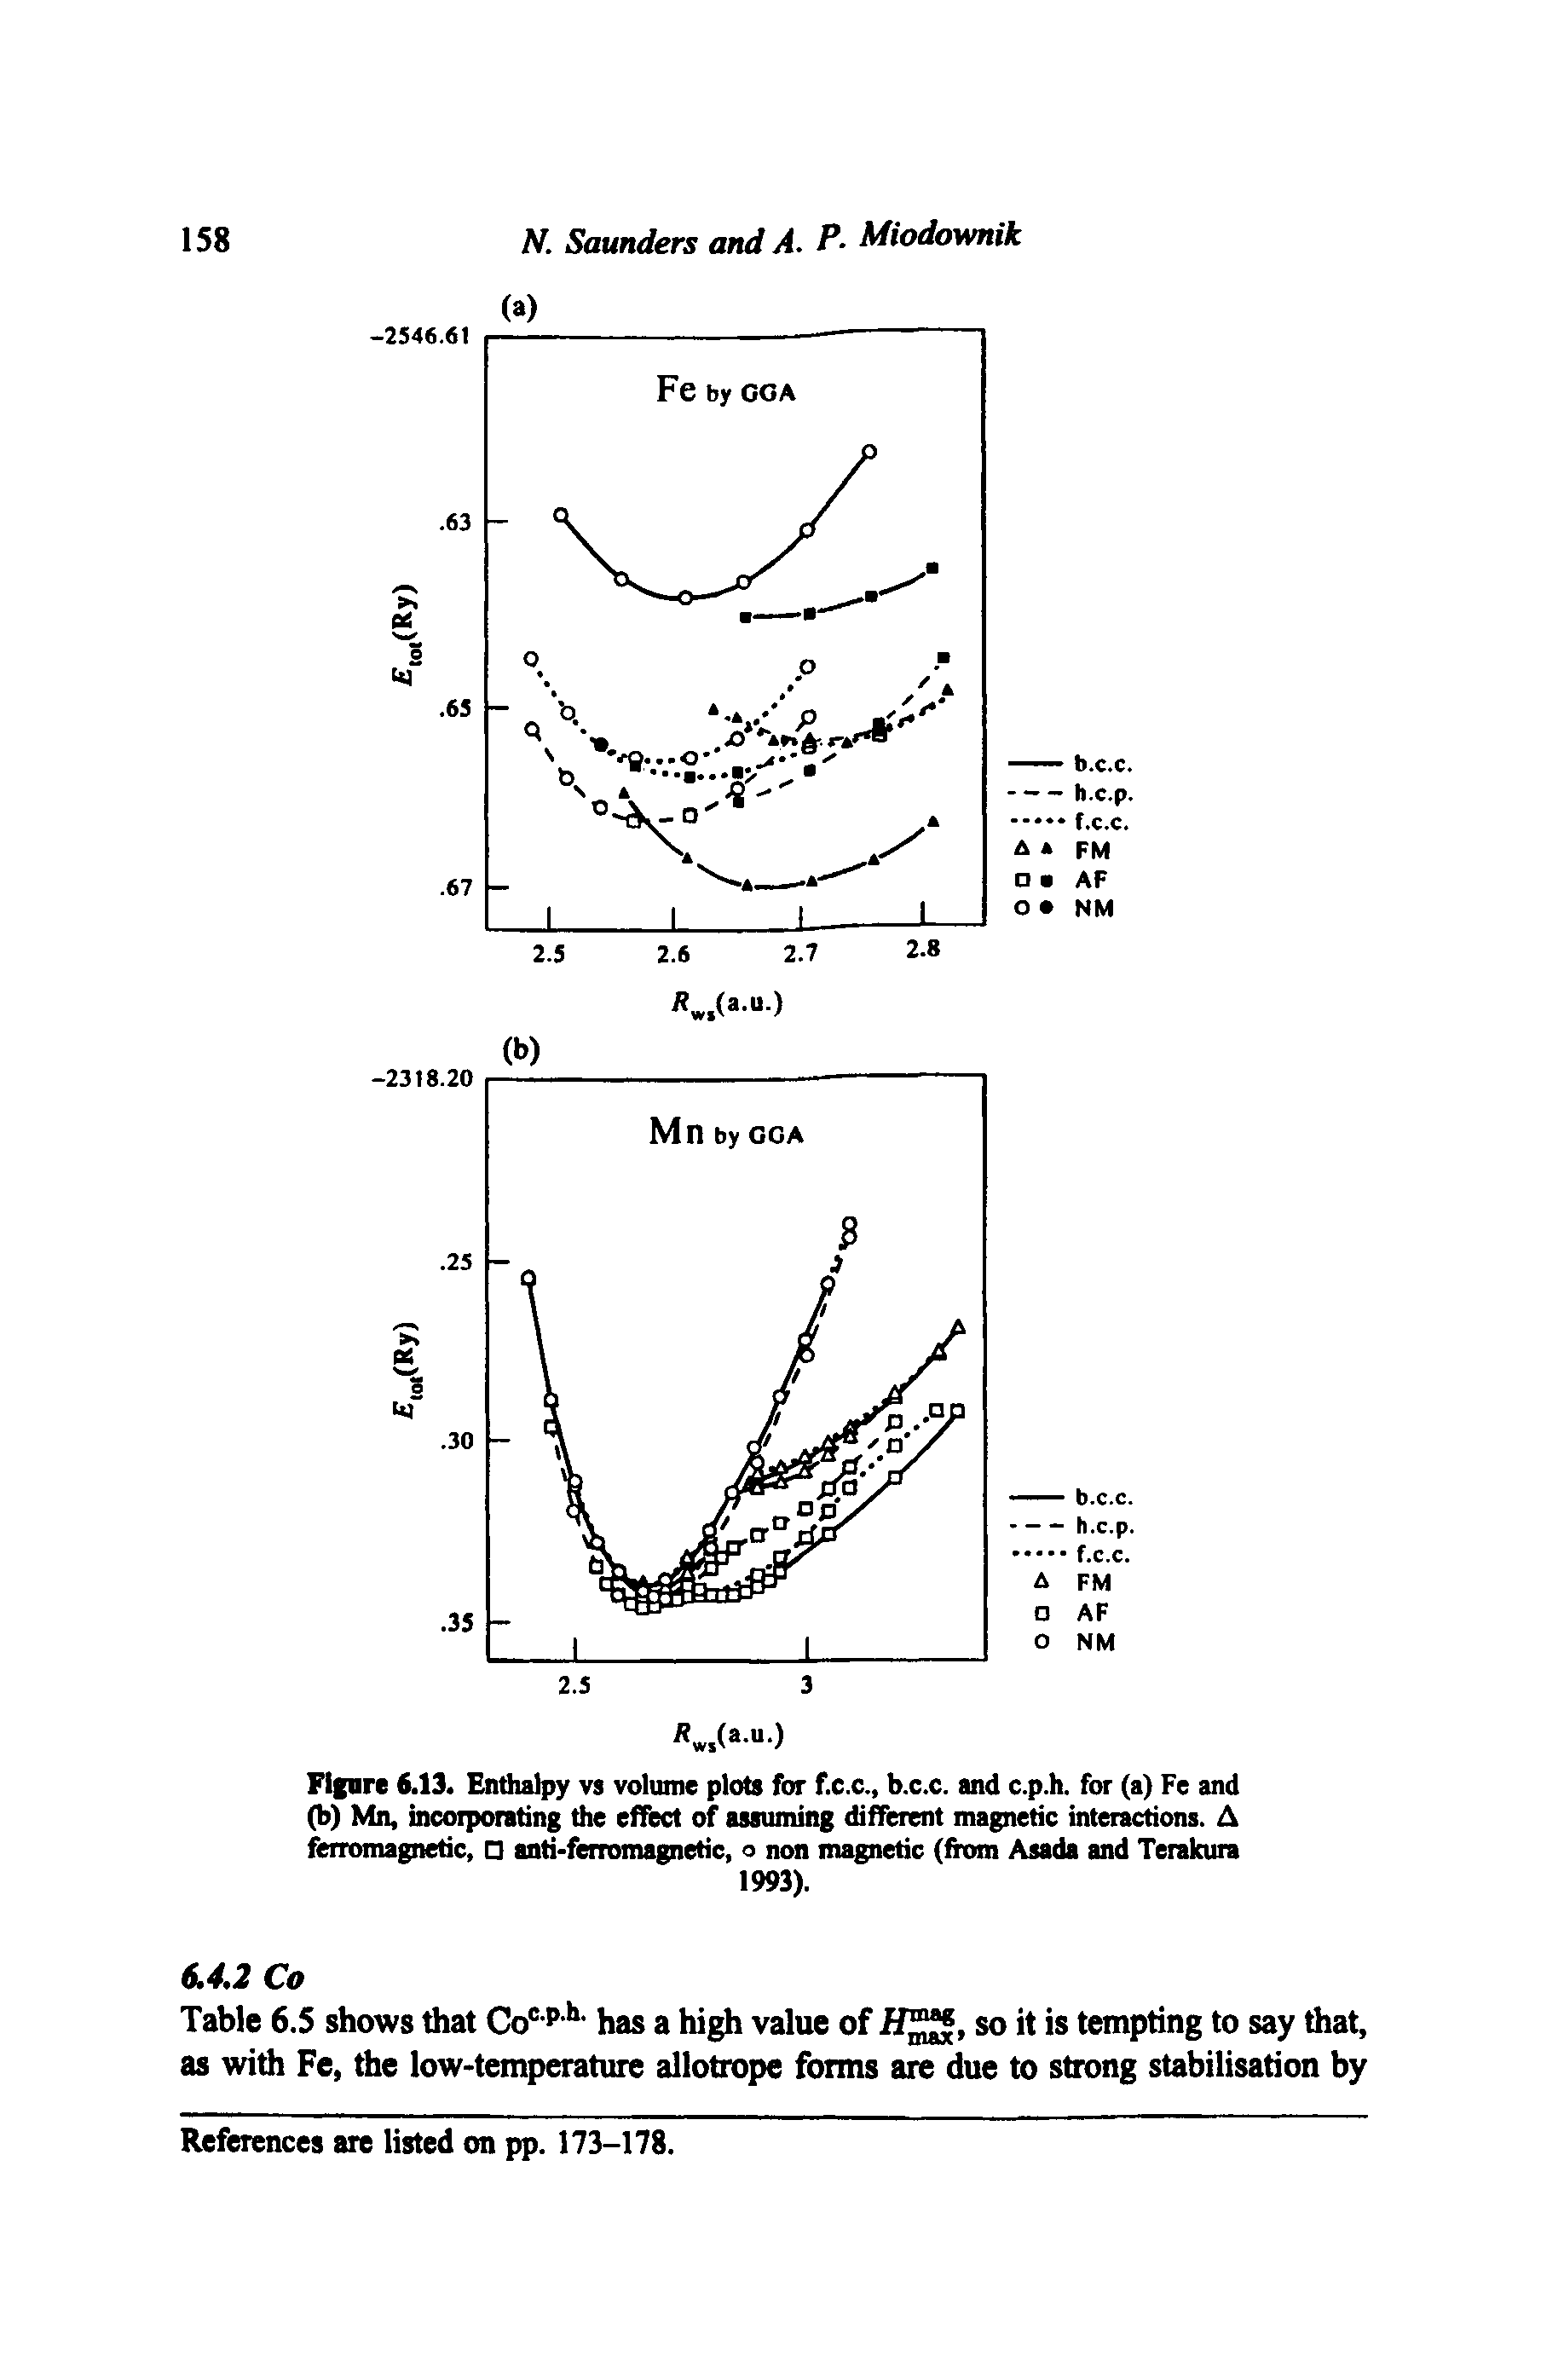 Figure 6.13. Enthalpy vs volume plots for f.c.c., b.c.c. and c.p.h. for (a) Fe and (b) Mn, incoiporating the effect of assuming different magnetic interactions. A ferromagnetic, anti-ferromagnetic, o non magnetic (fiom Asada and Terakuta...